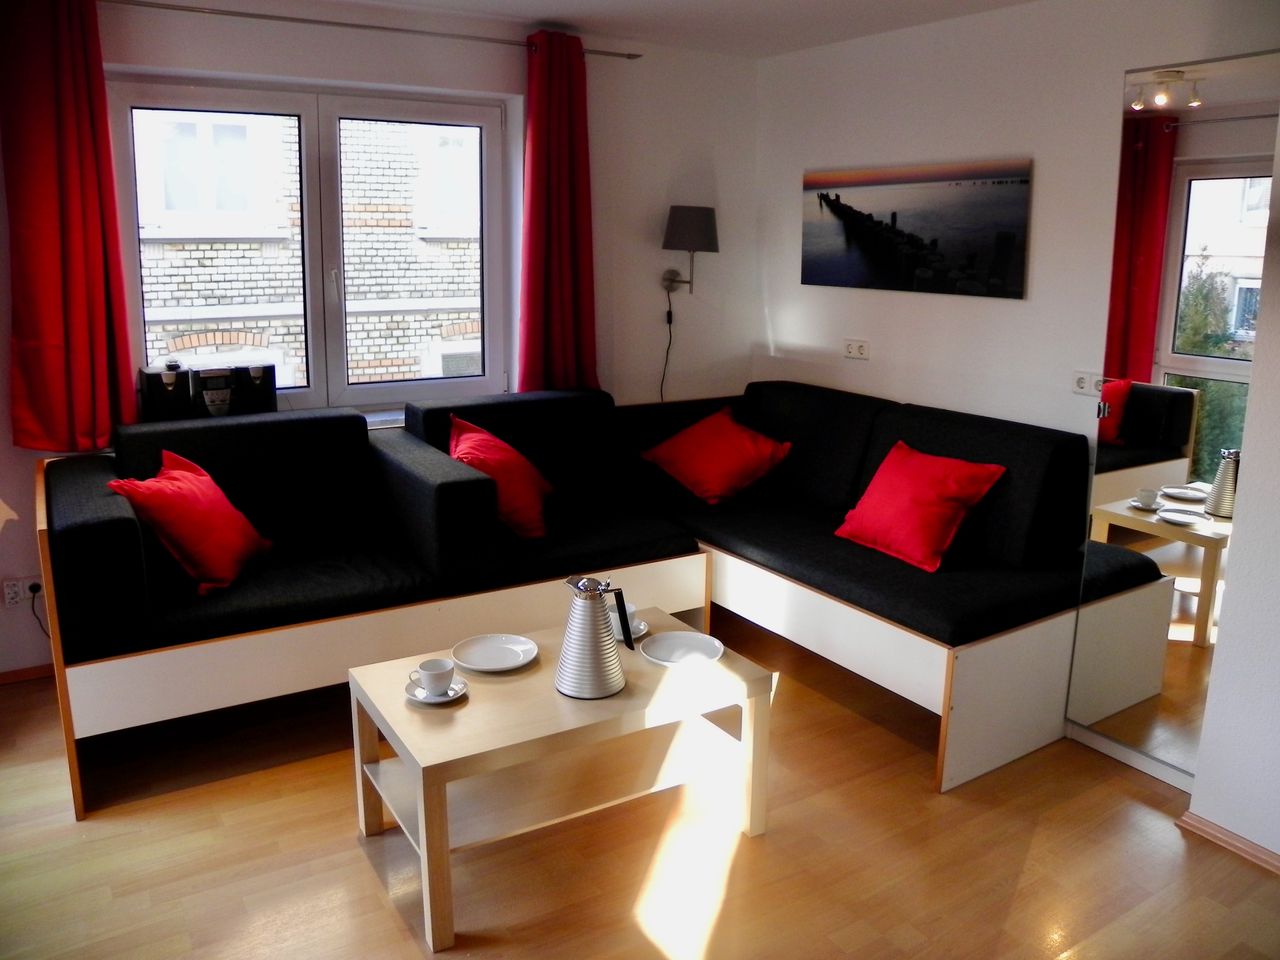 Top location! Furnished 2-room-apartment with balcony, parking is optional